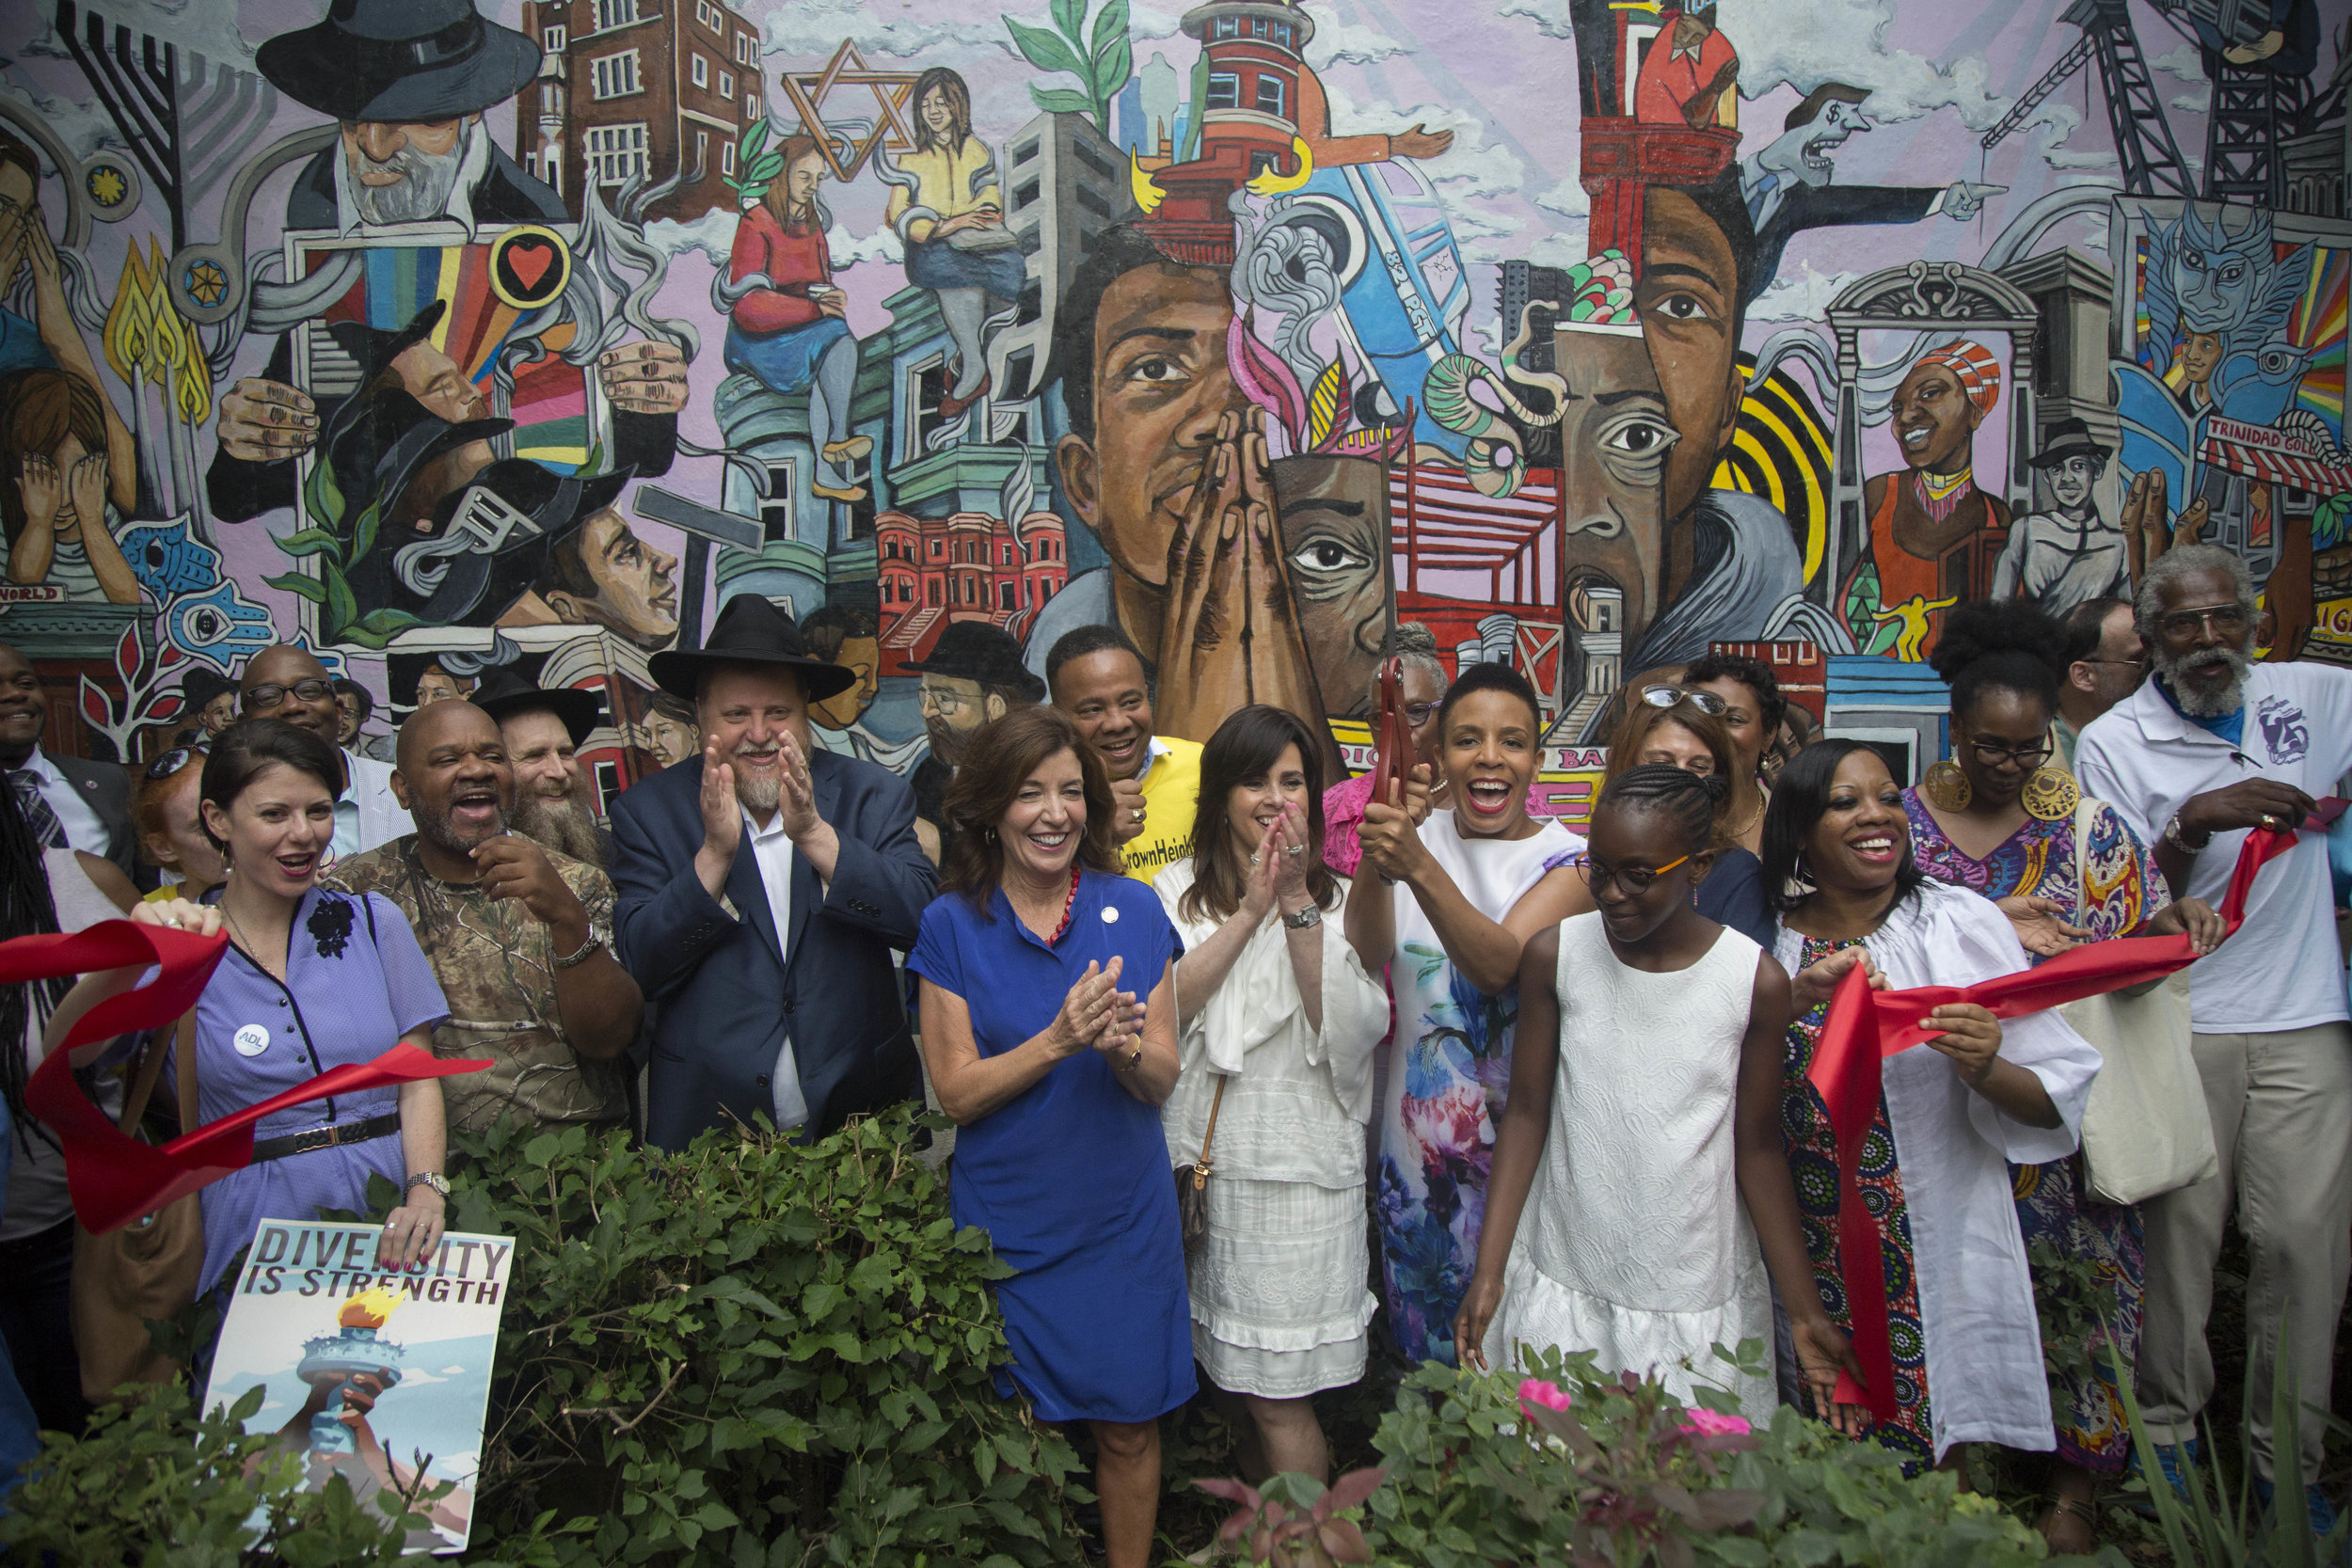 City Council Member Laurie Cumbo Cuts Ribbon On New Community Mural During One Crown Heights Summer Festival